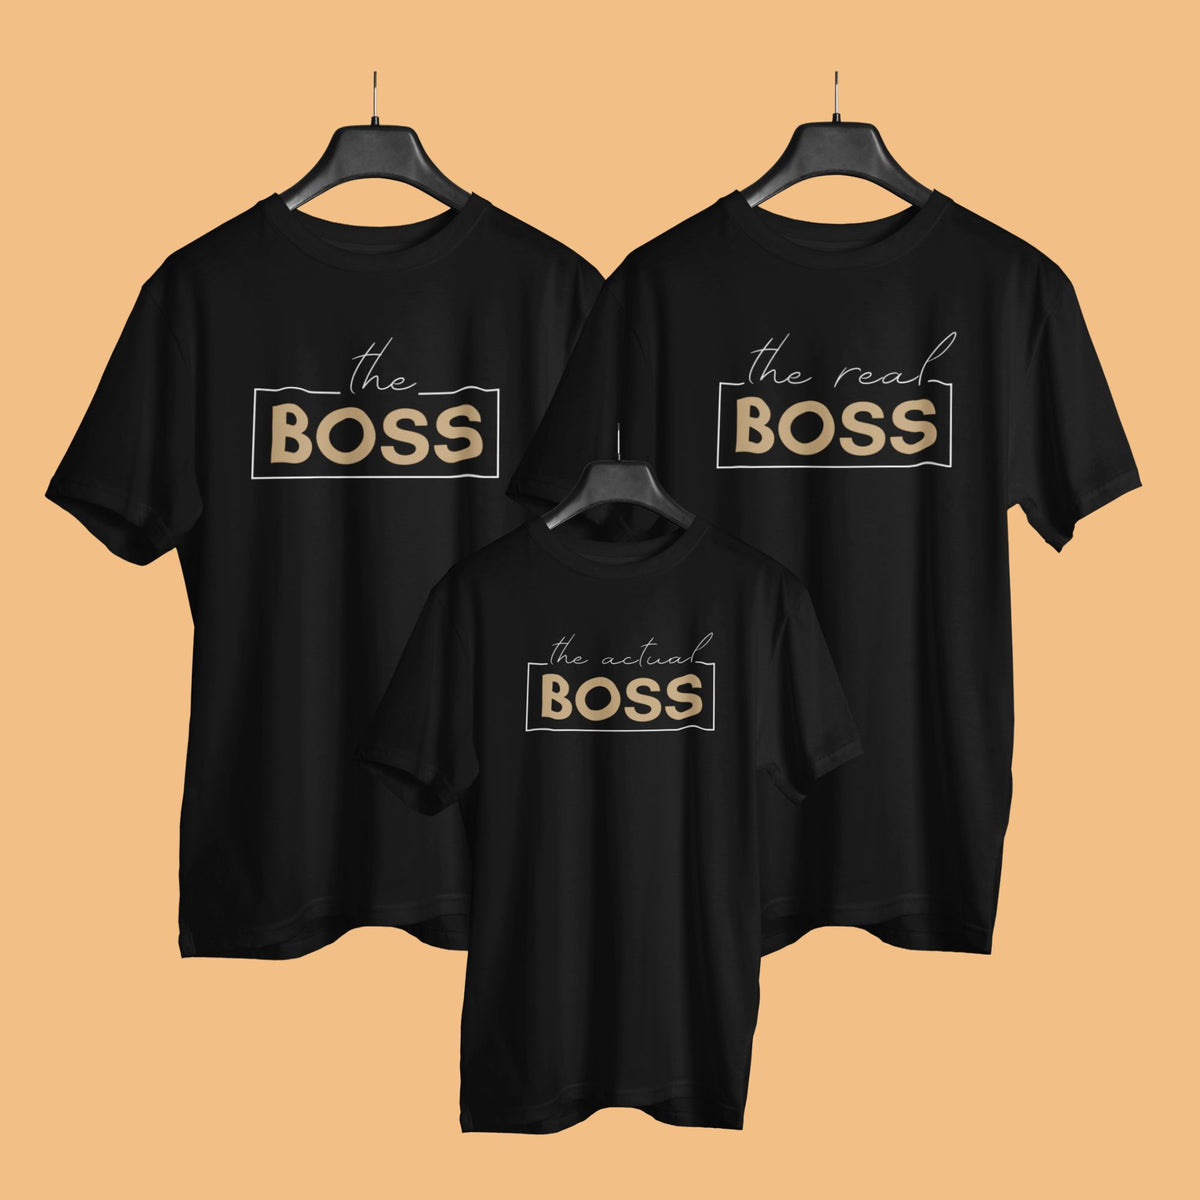 the-boss-matching-family-black-t-shirts-for-mom-dad-son-daughter-gogirgit-hanger